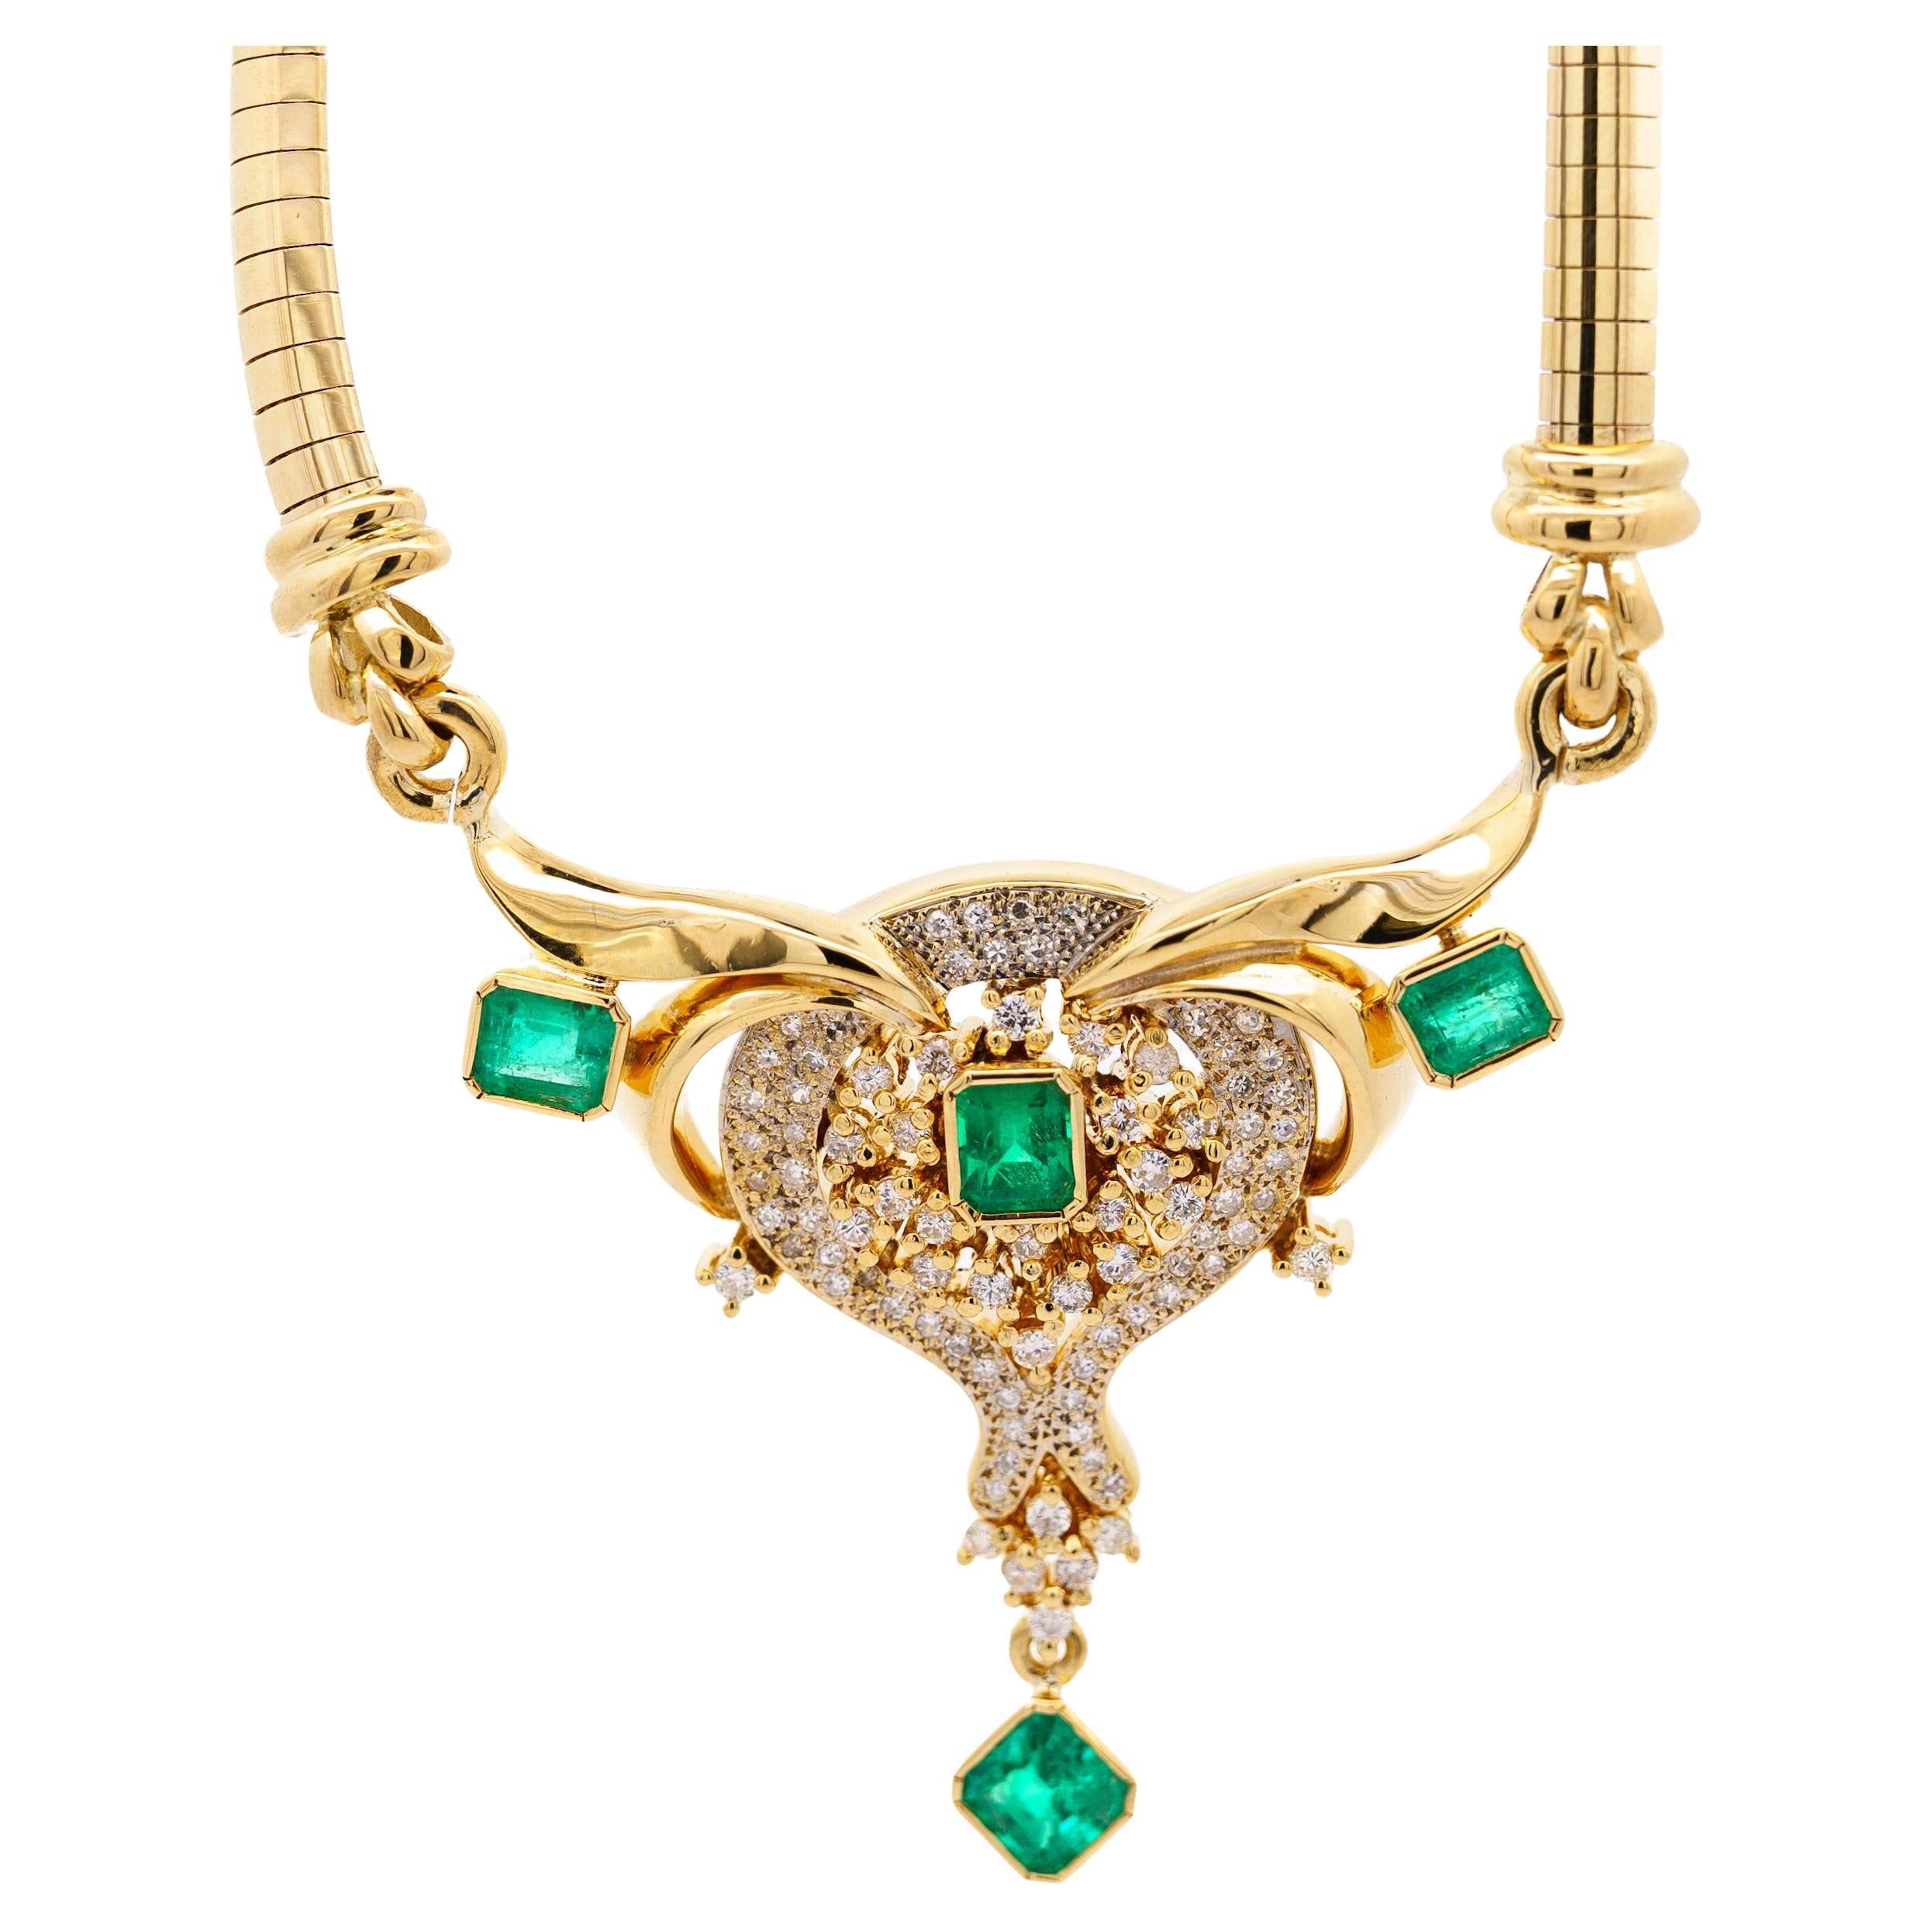 Vintage 5 Carat Emerald & Diamond Necklace in 14K Yellow Gold For Sale